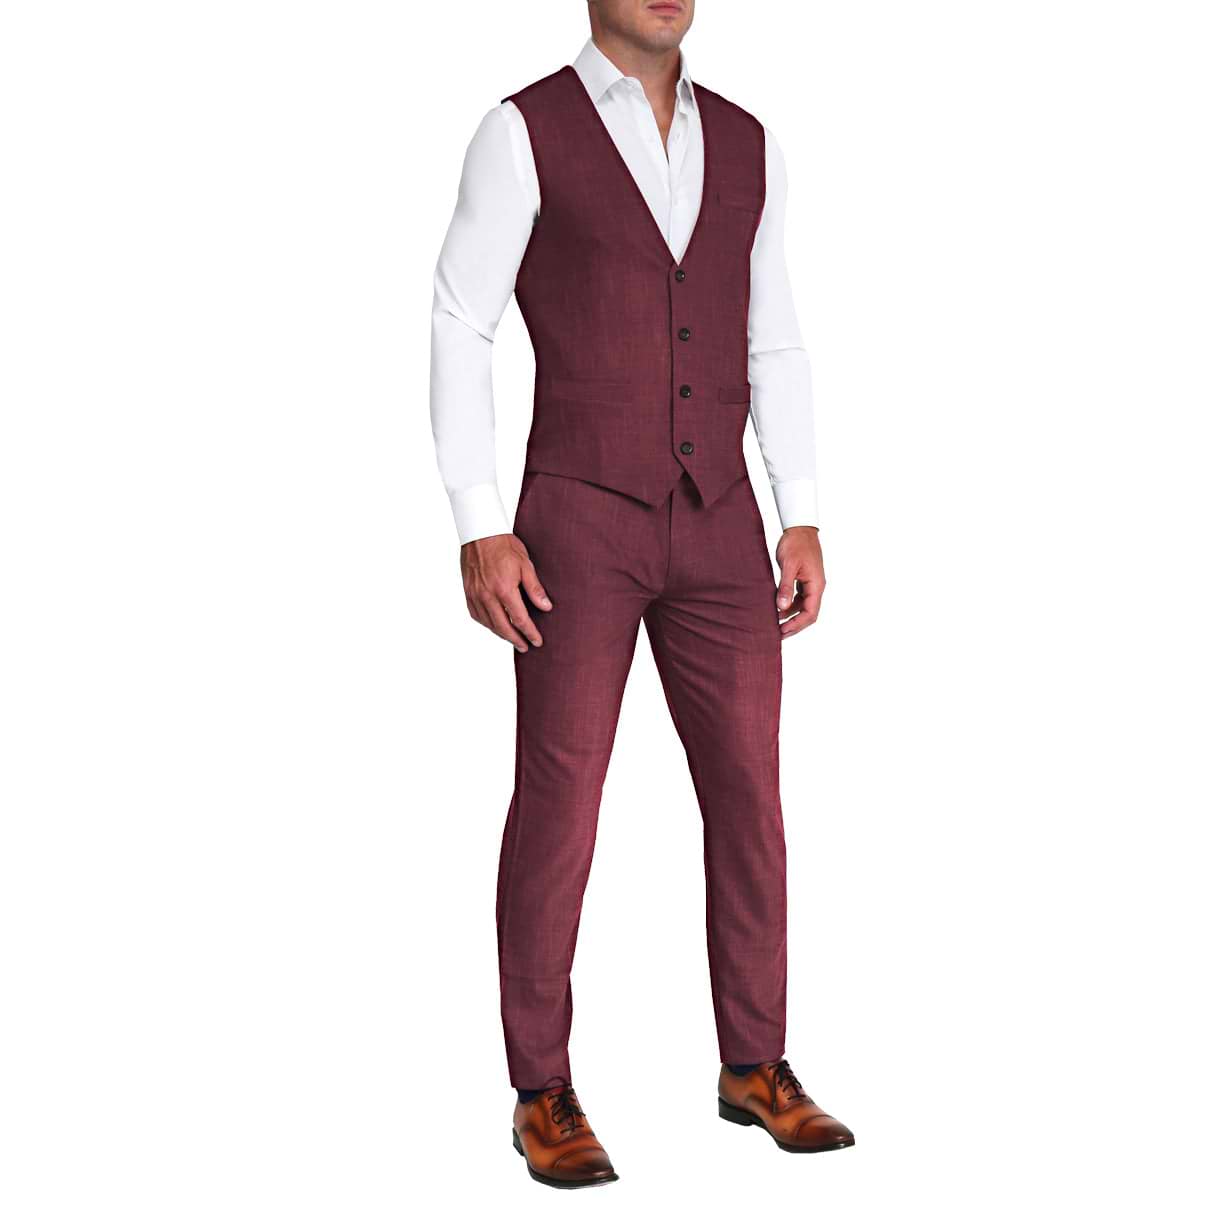 Athletic Fit Stretch Suit Vest - Heathered Maroon